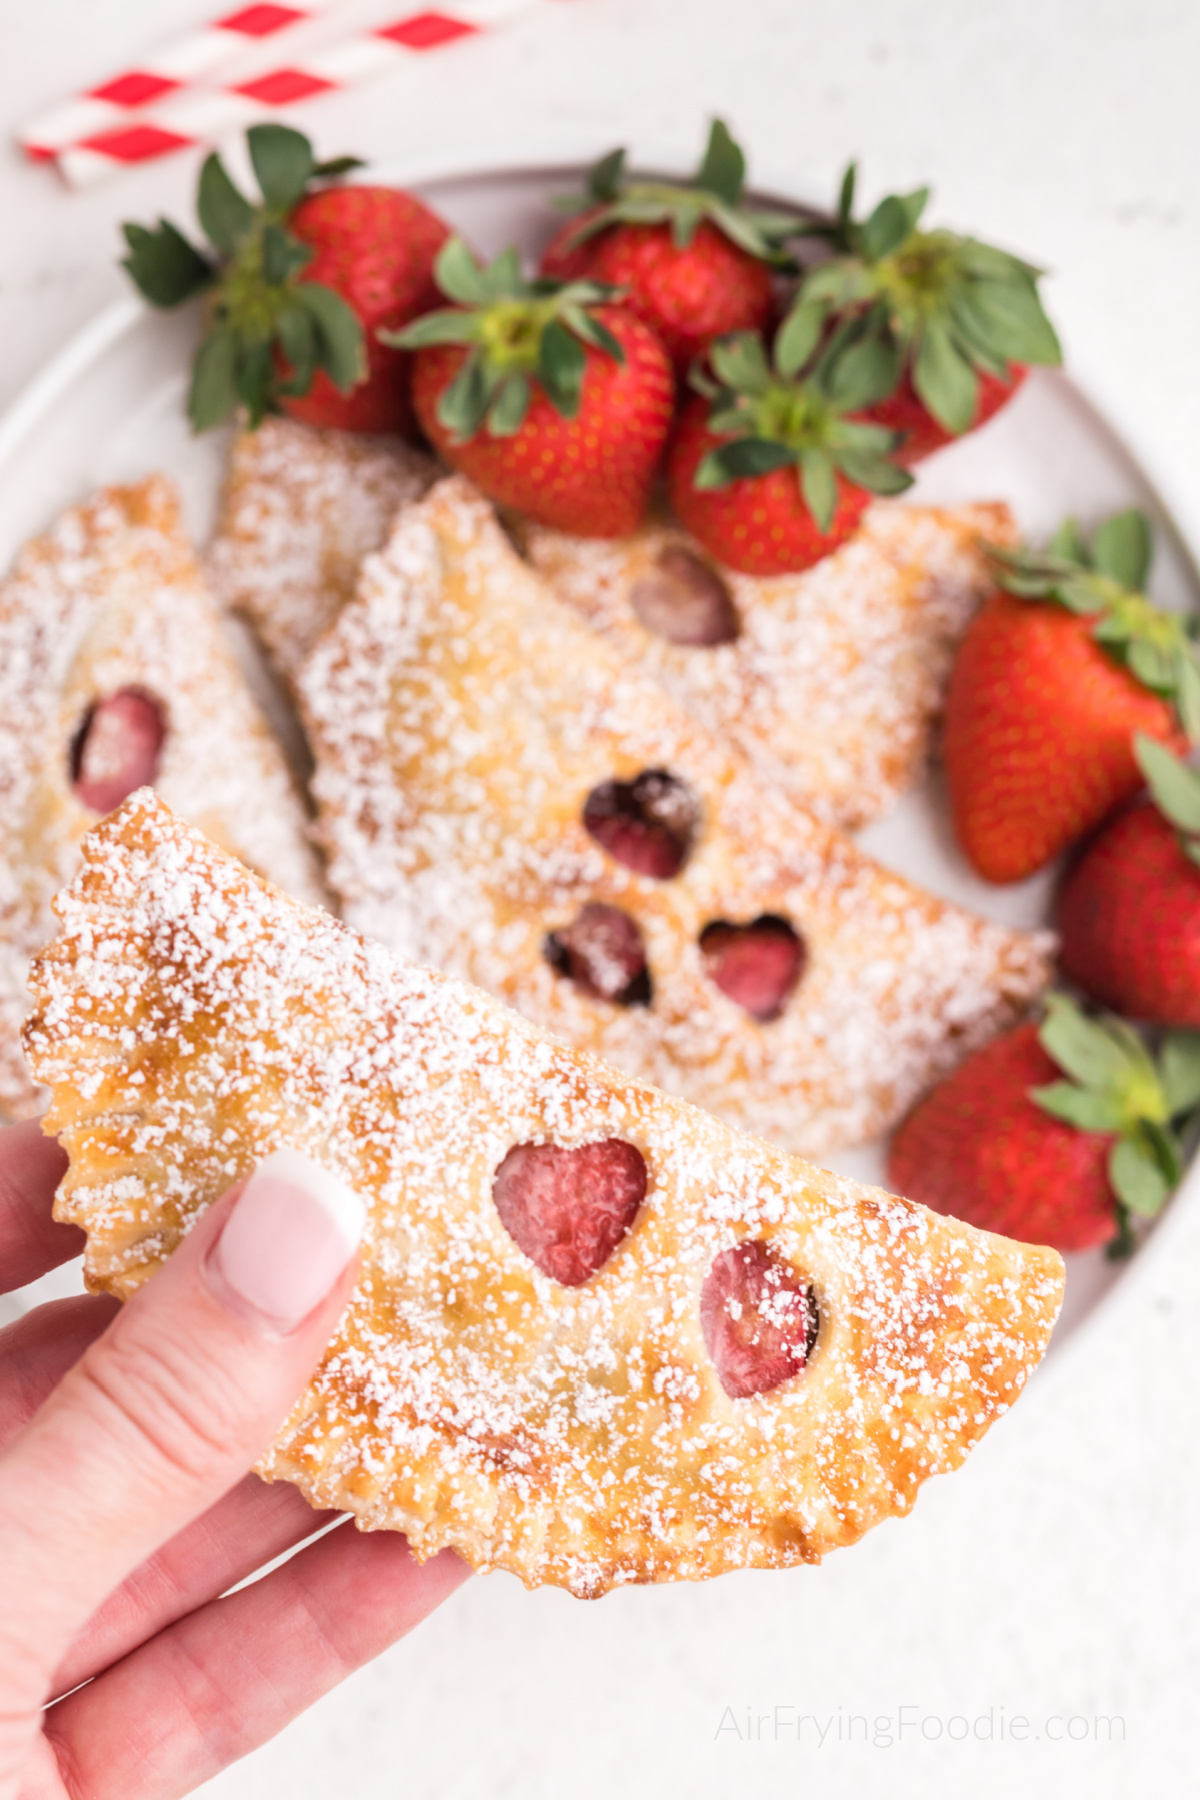 Hand holding a strawberry nutella hand pie dusted with powdered sugar.